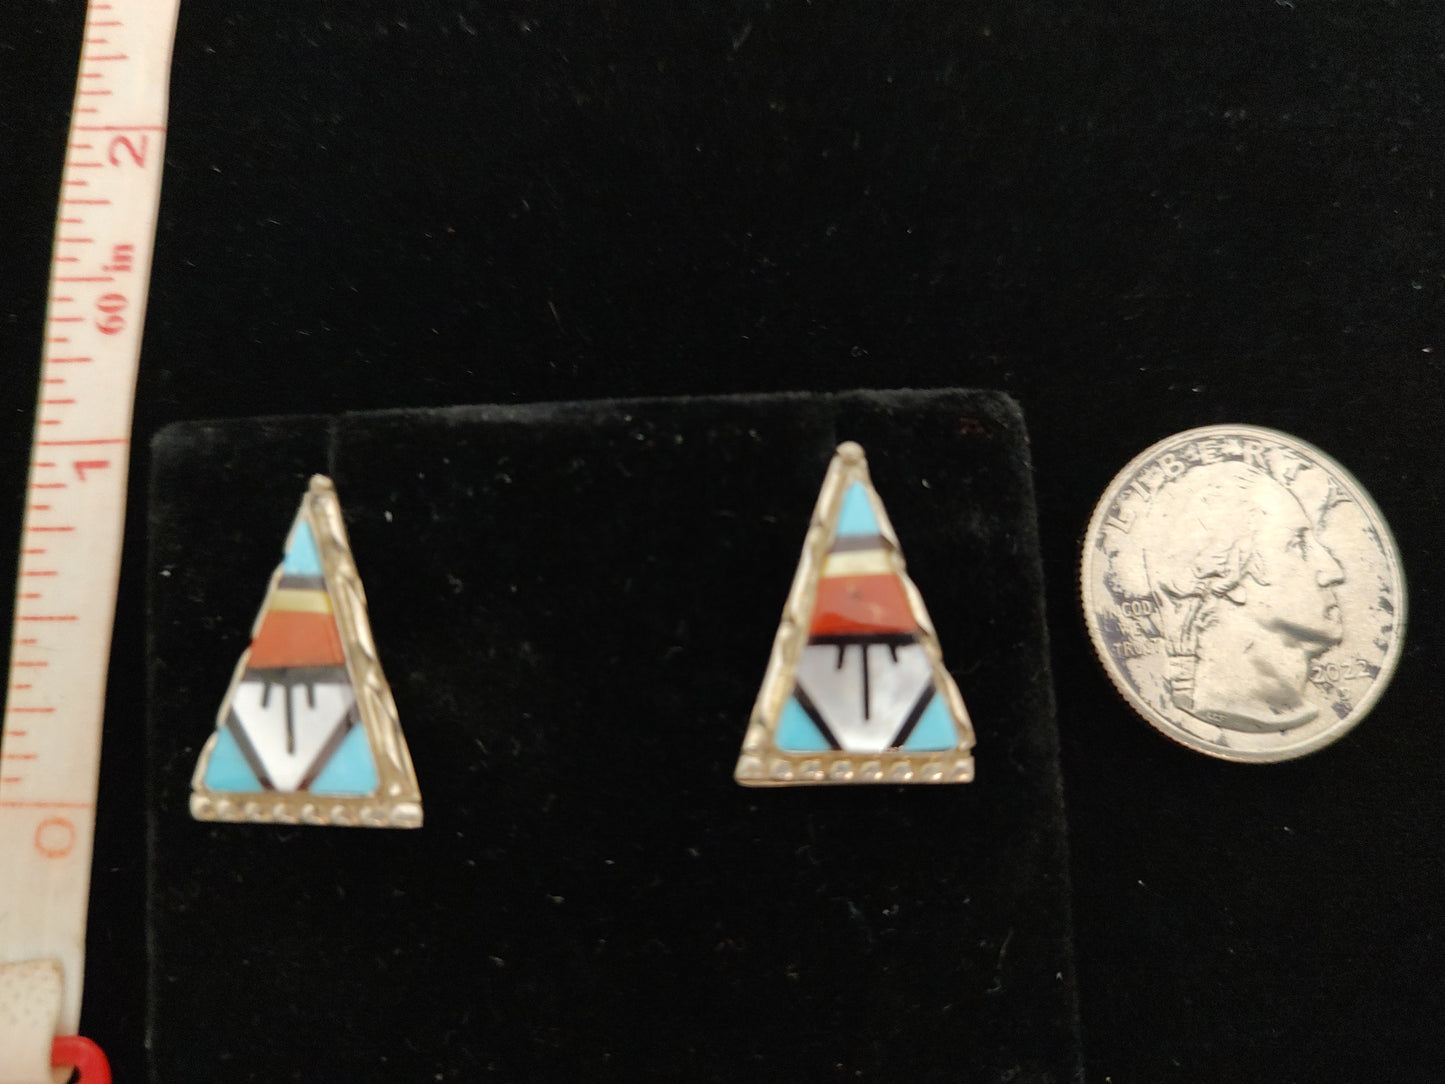 Mother of Pearl, Coral, Black Jet, and Turquoise Inlay in Post Earrings